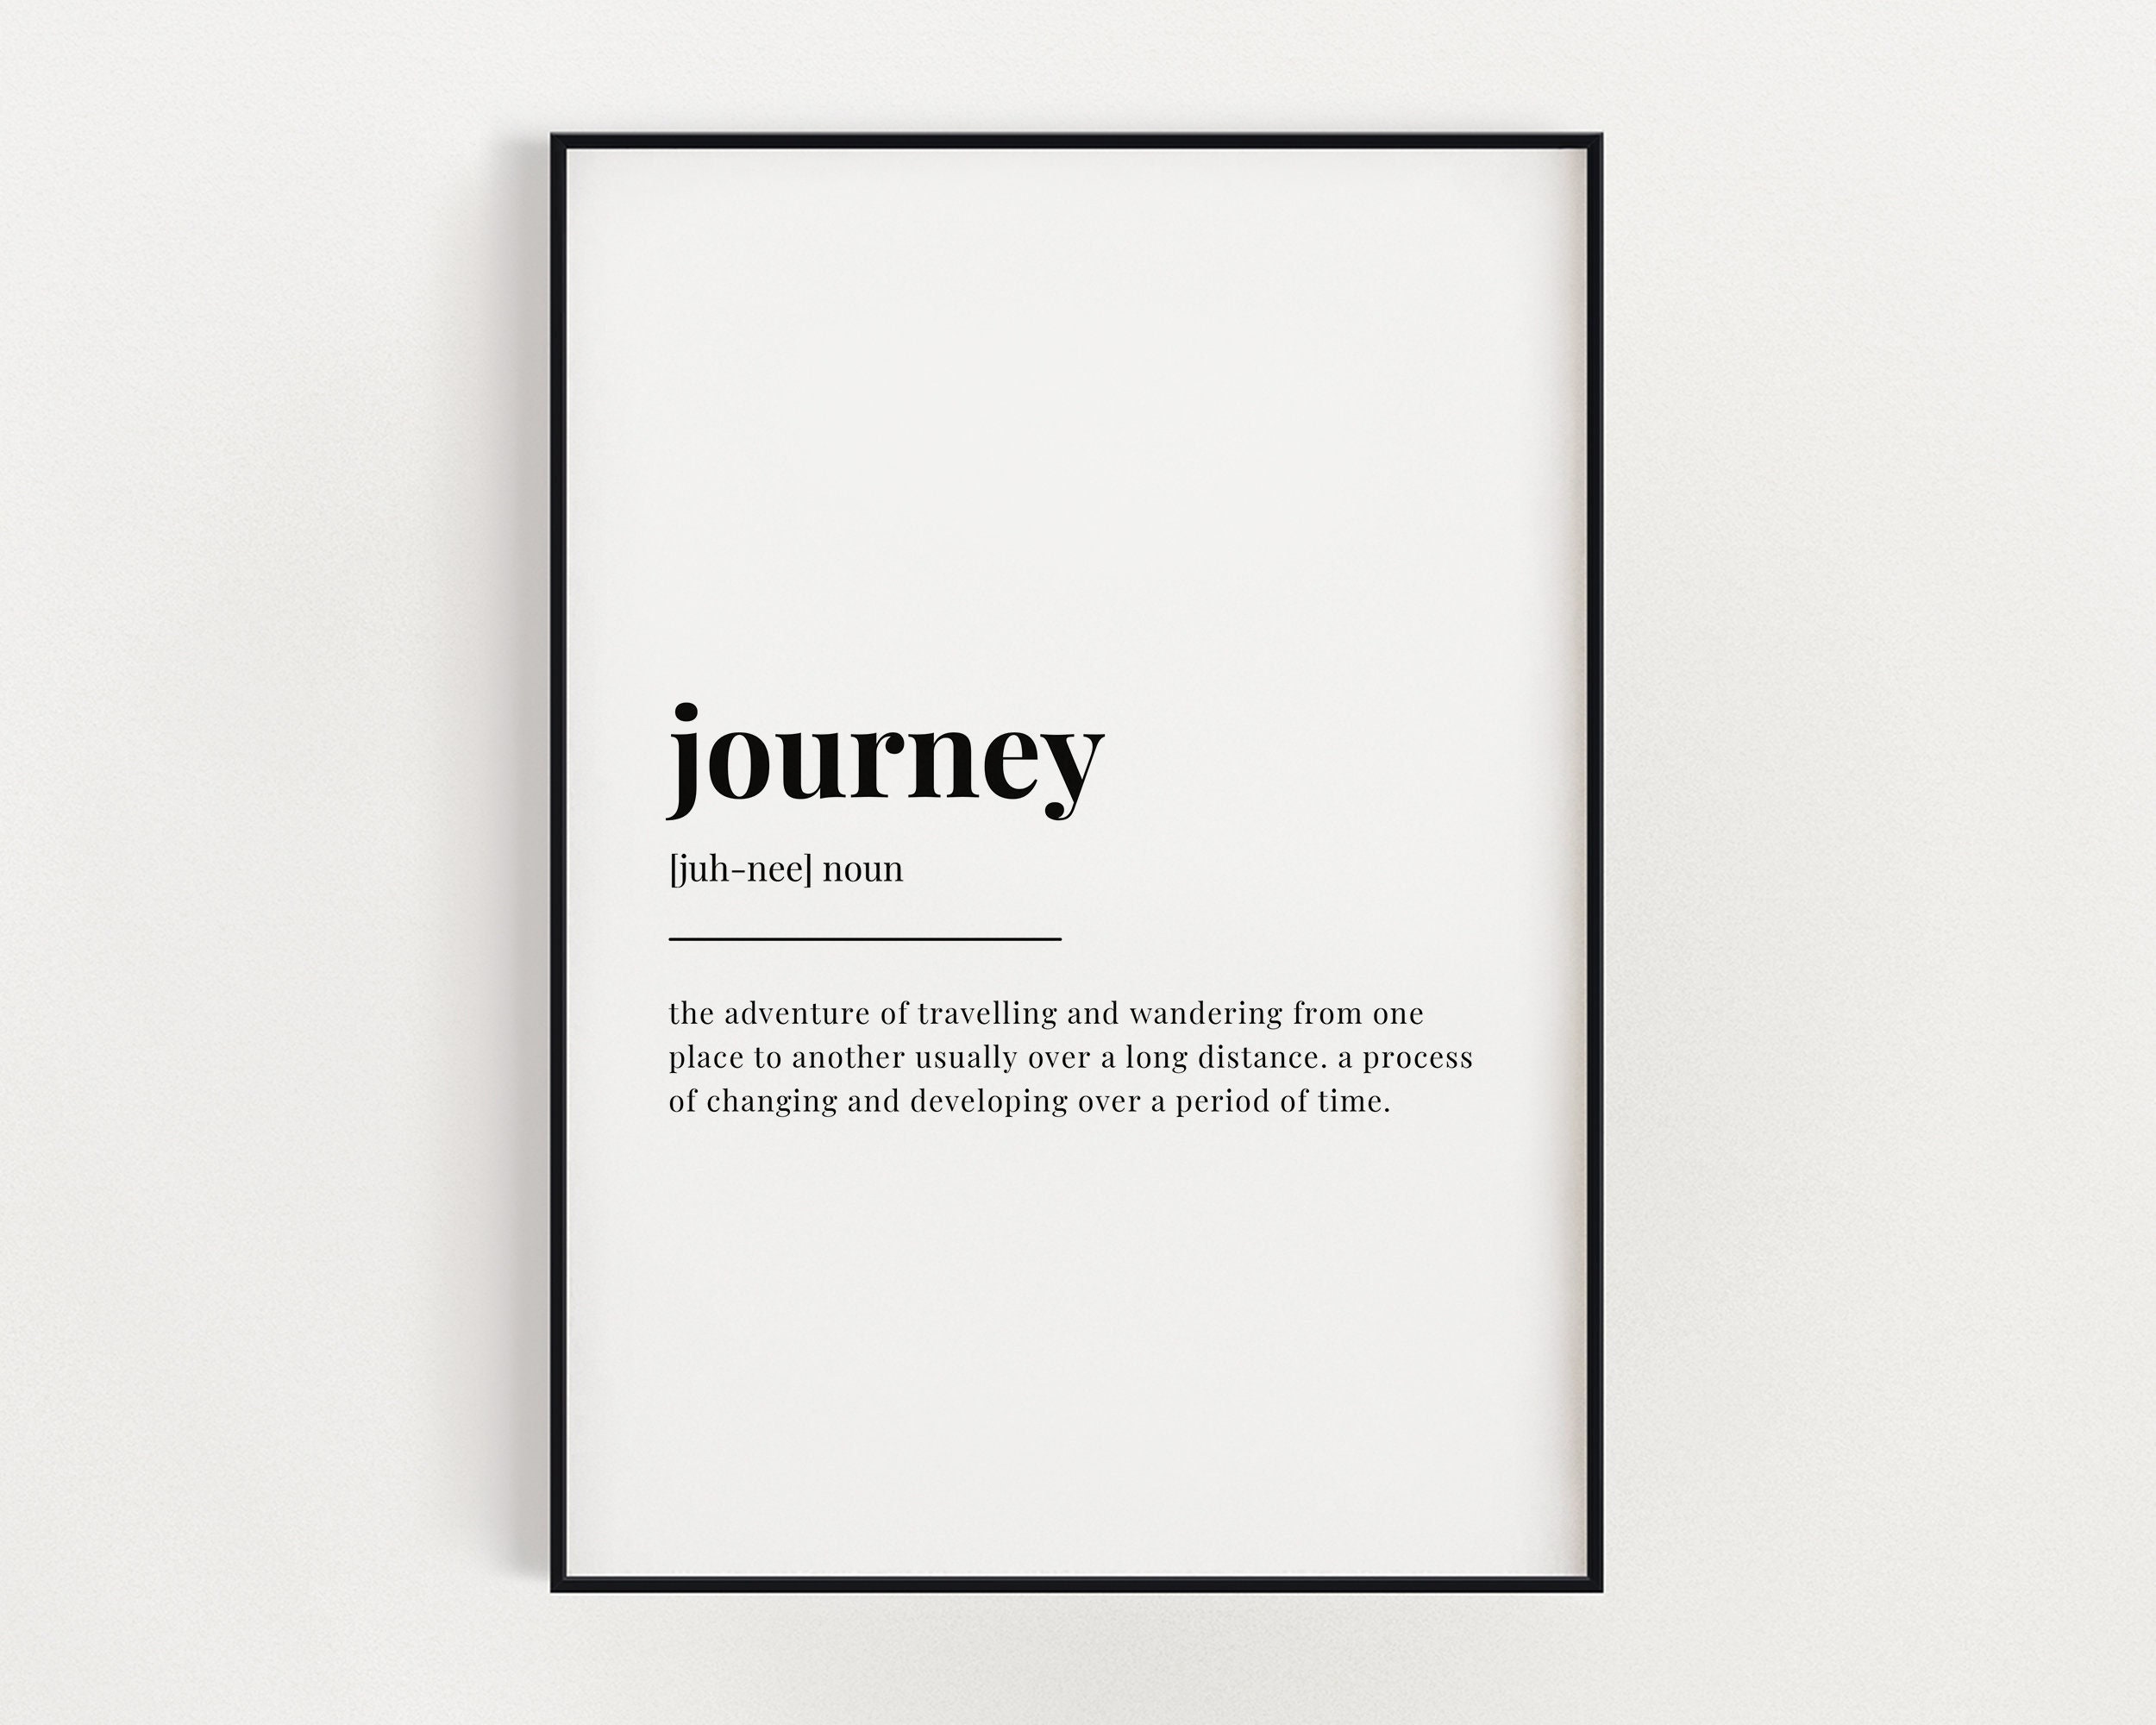 journey reference definition